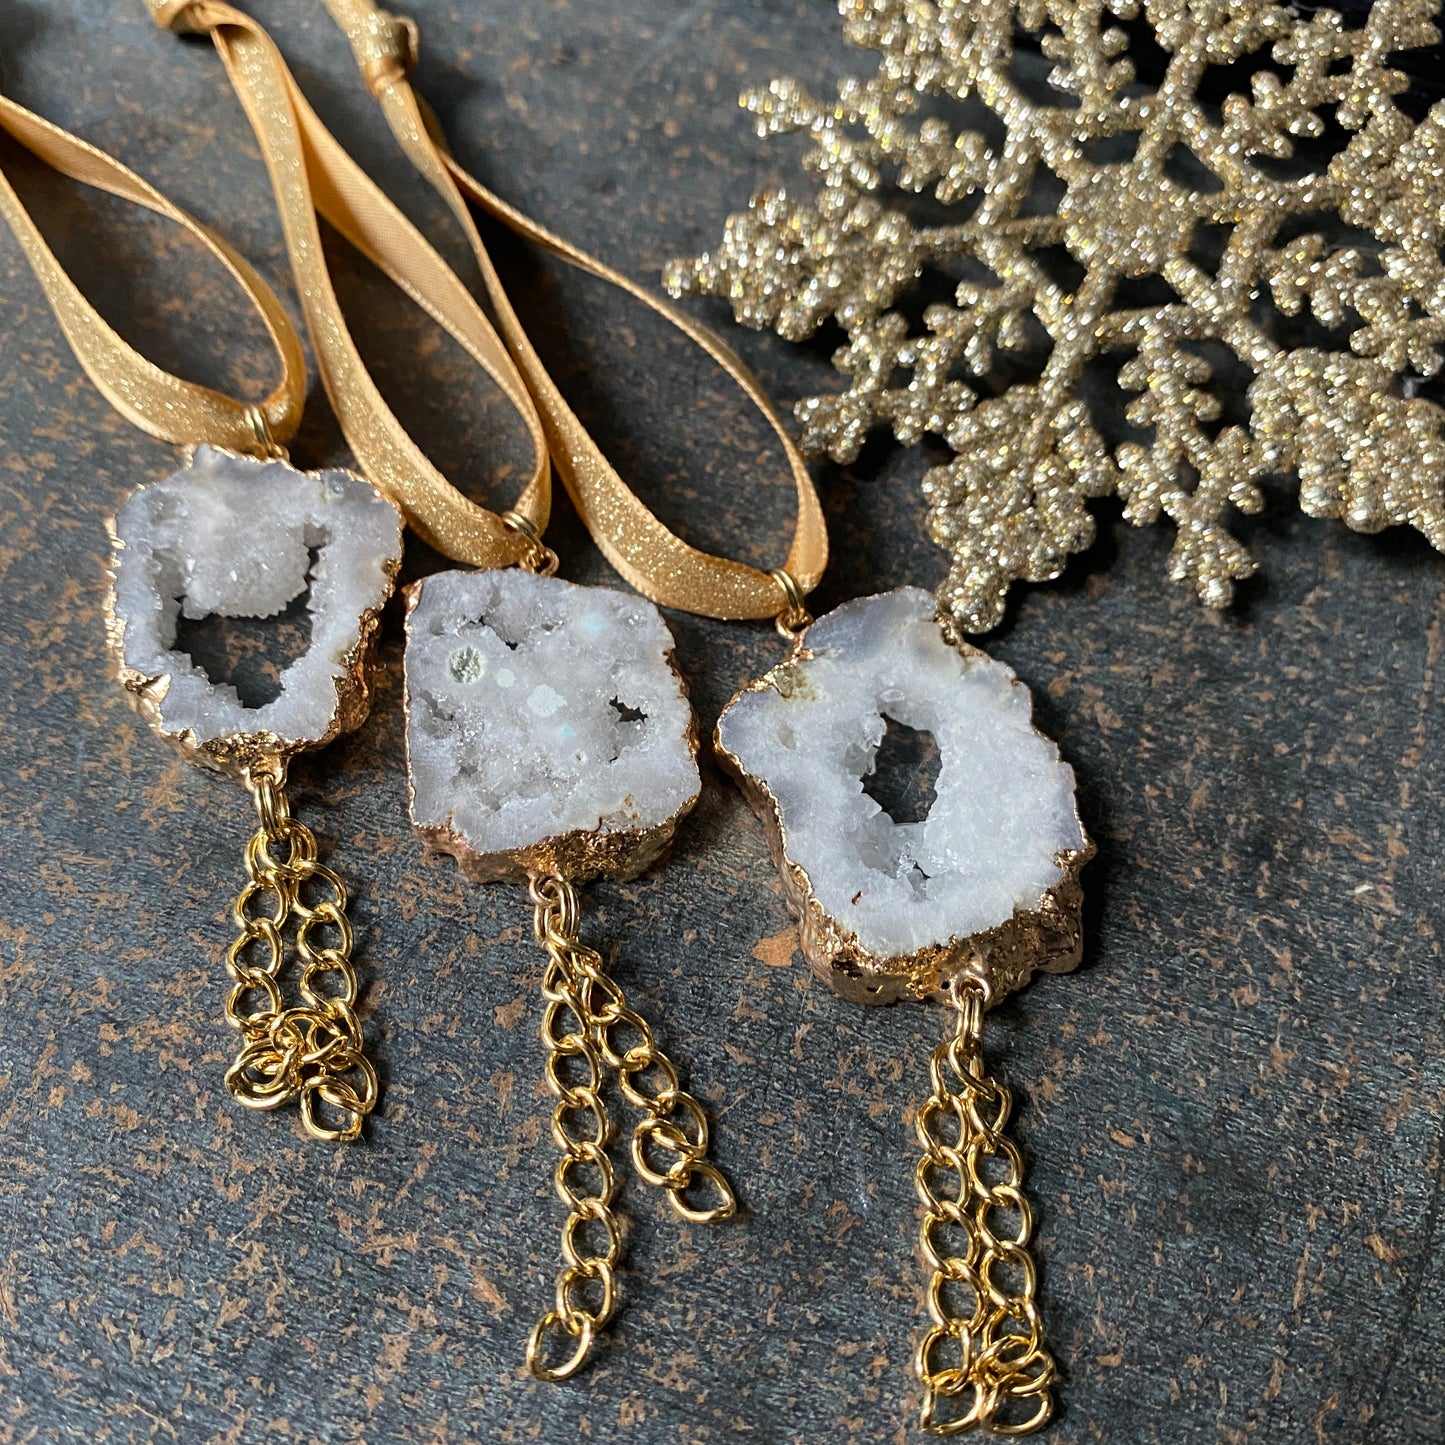 Geode Slice Ornaments, Set of 3, Natural Christmas Tree Decor